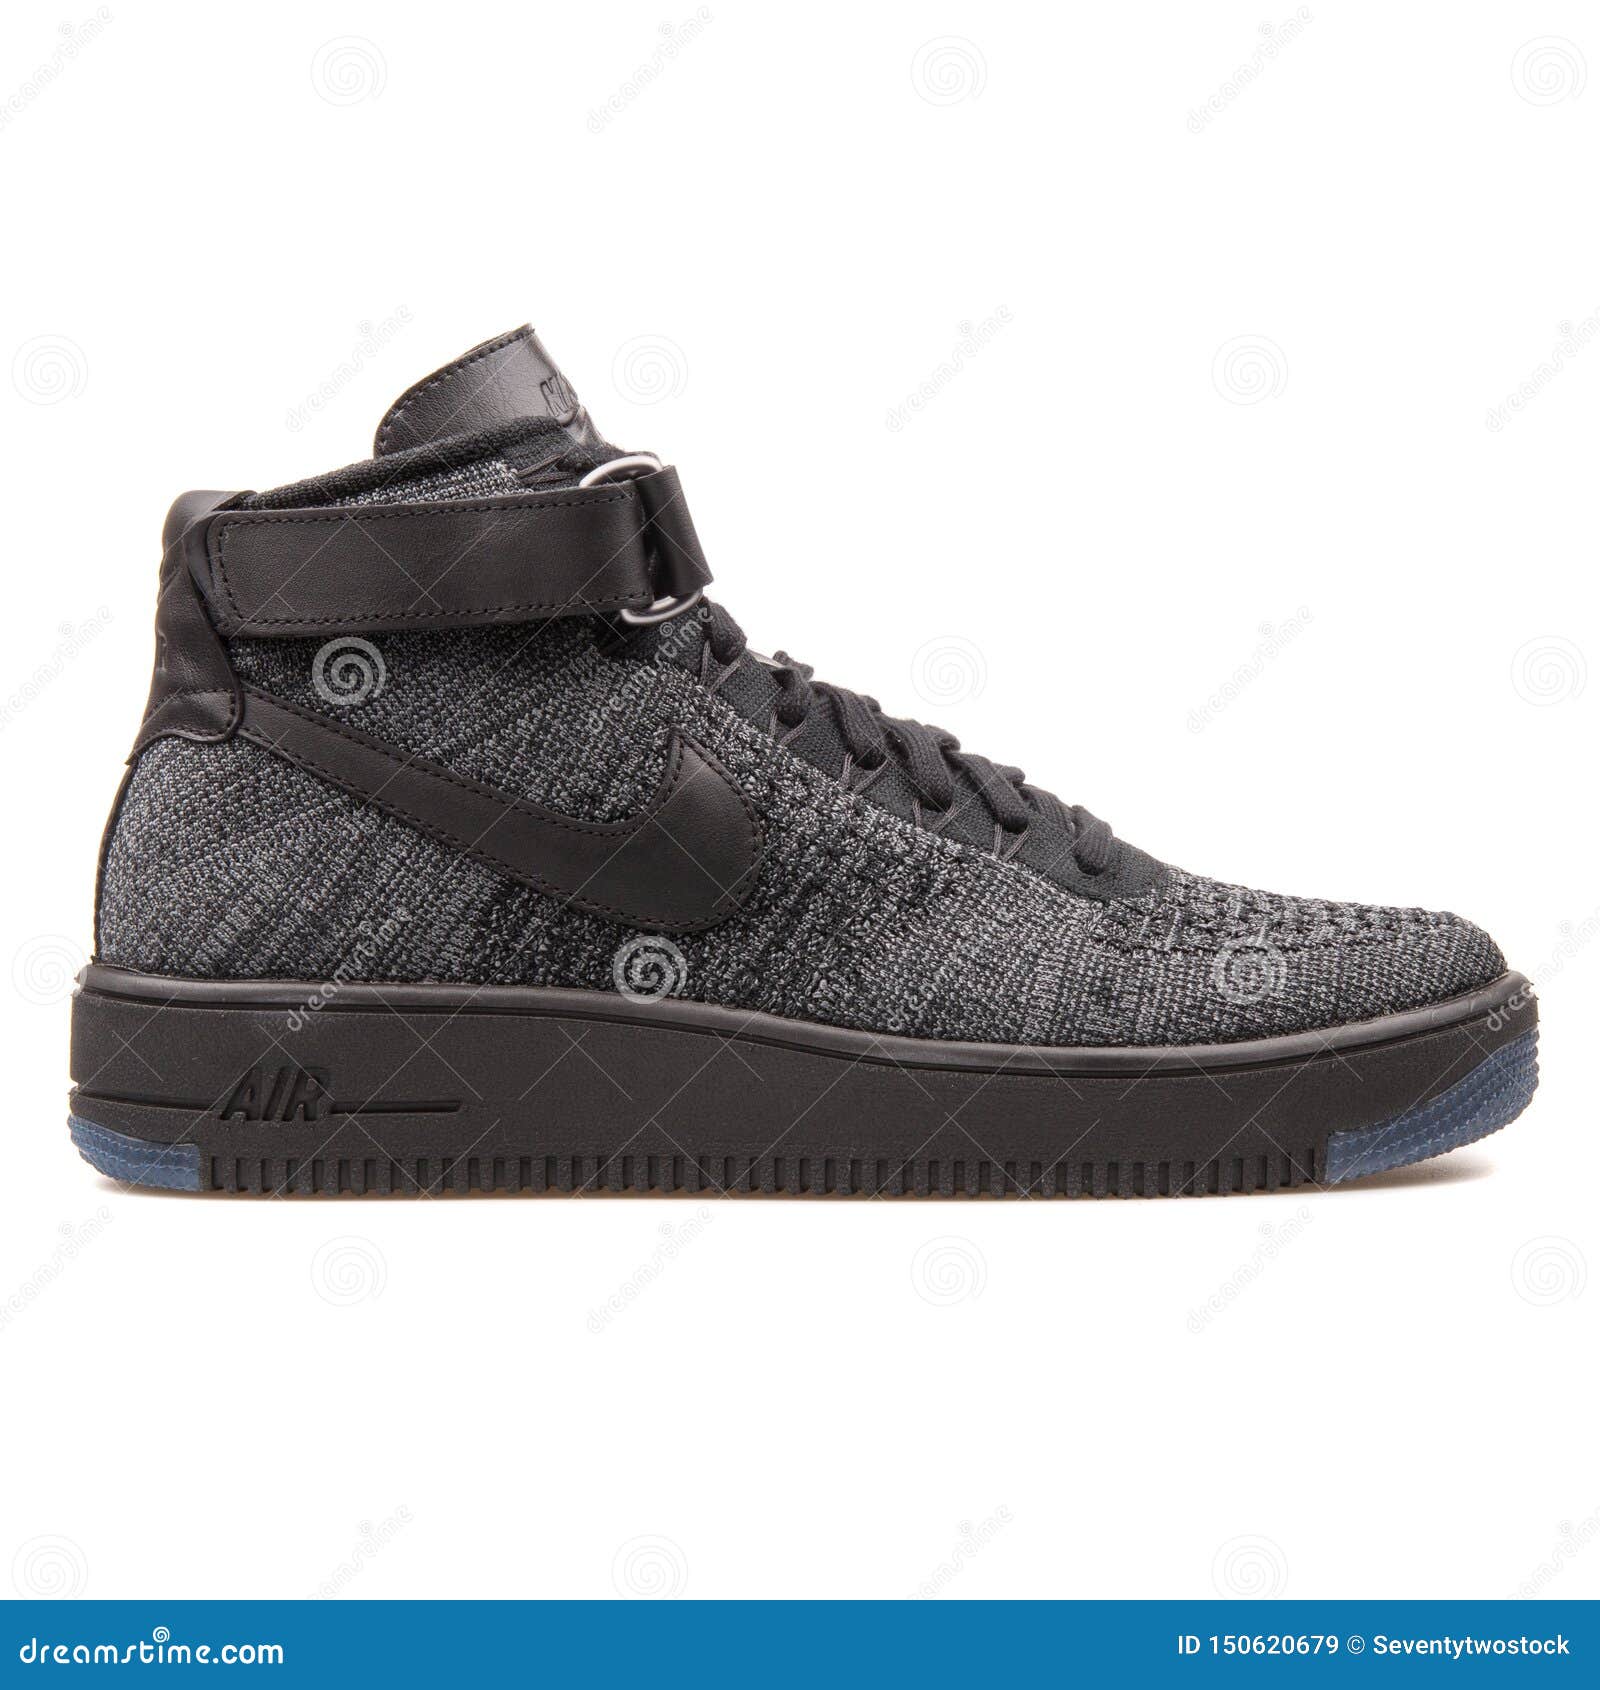 Nike Force 1 Ultra Flyknit Mid and Grey Editorial Stock Image - Image of colour, mens: 150620679